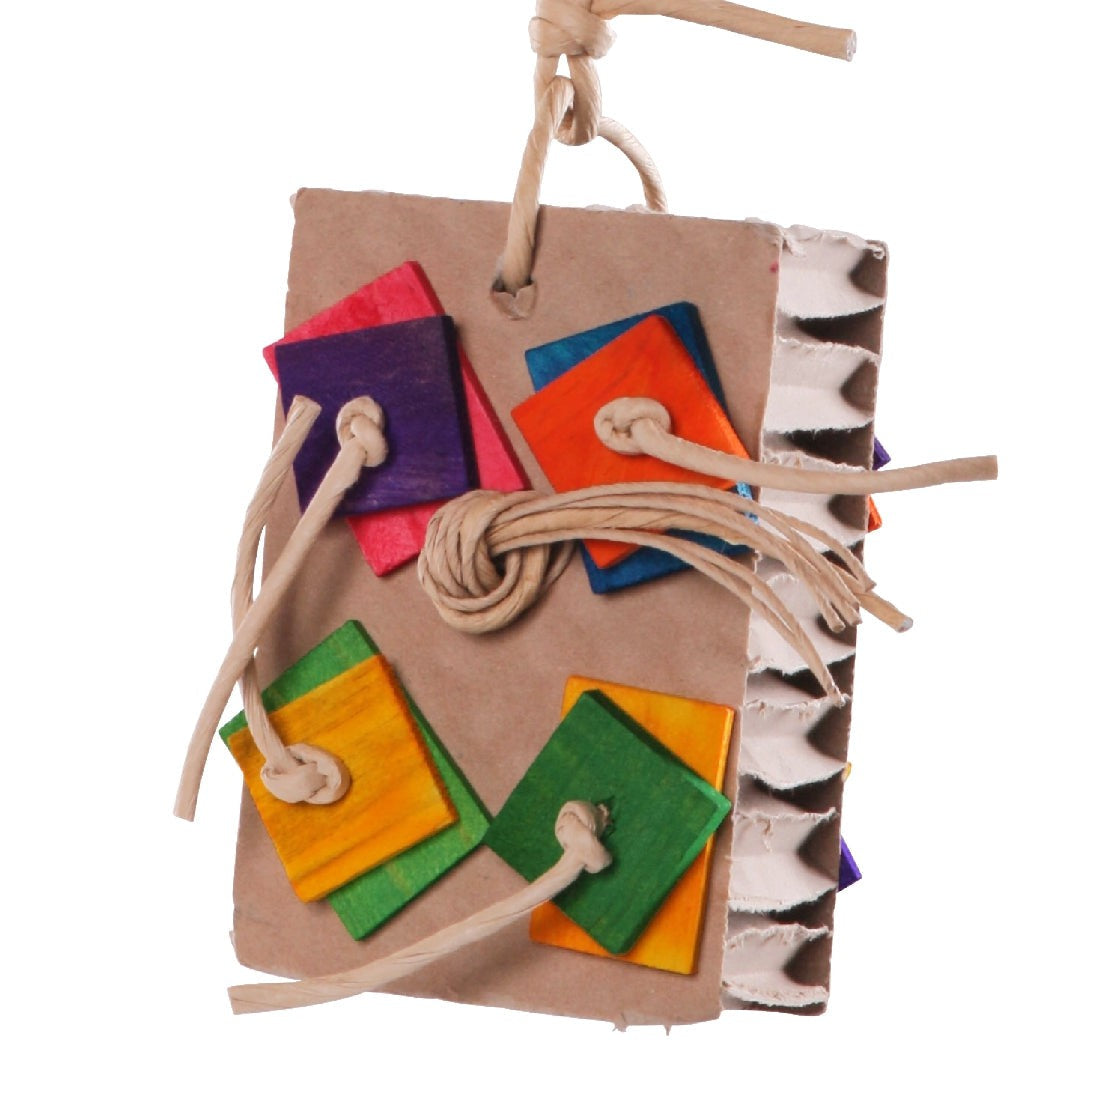 Colorful wooden squares on paper bird toy with knotted ropes.